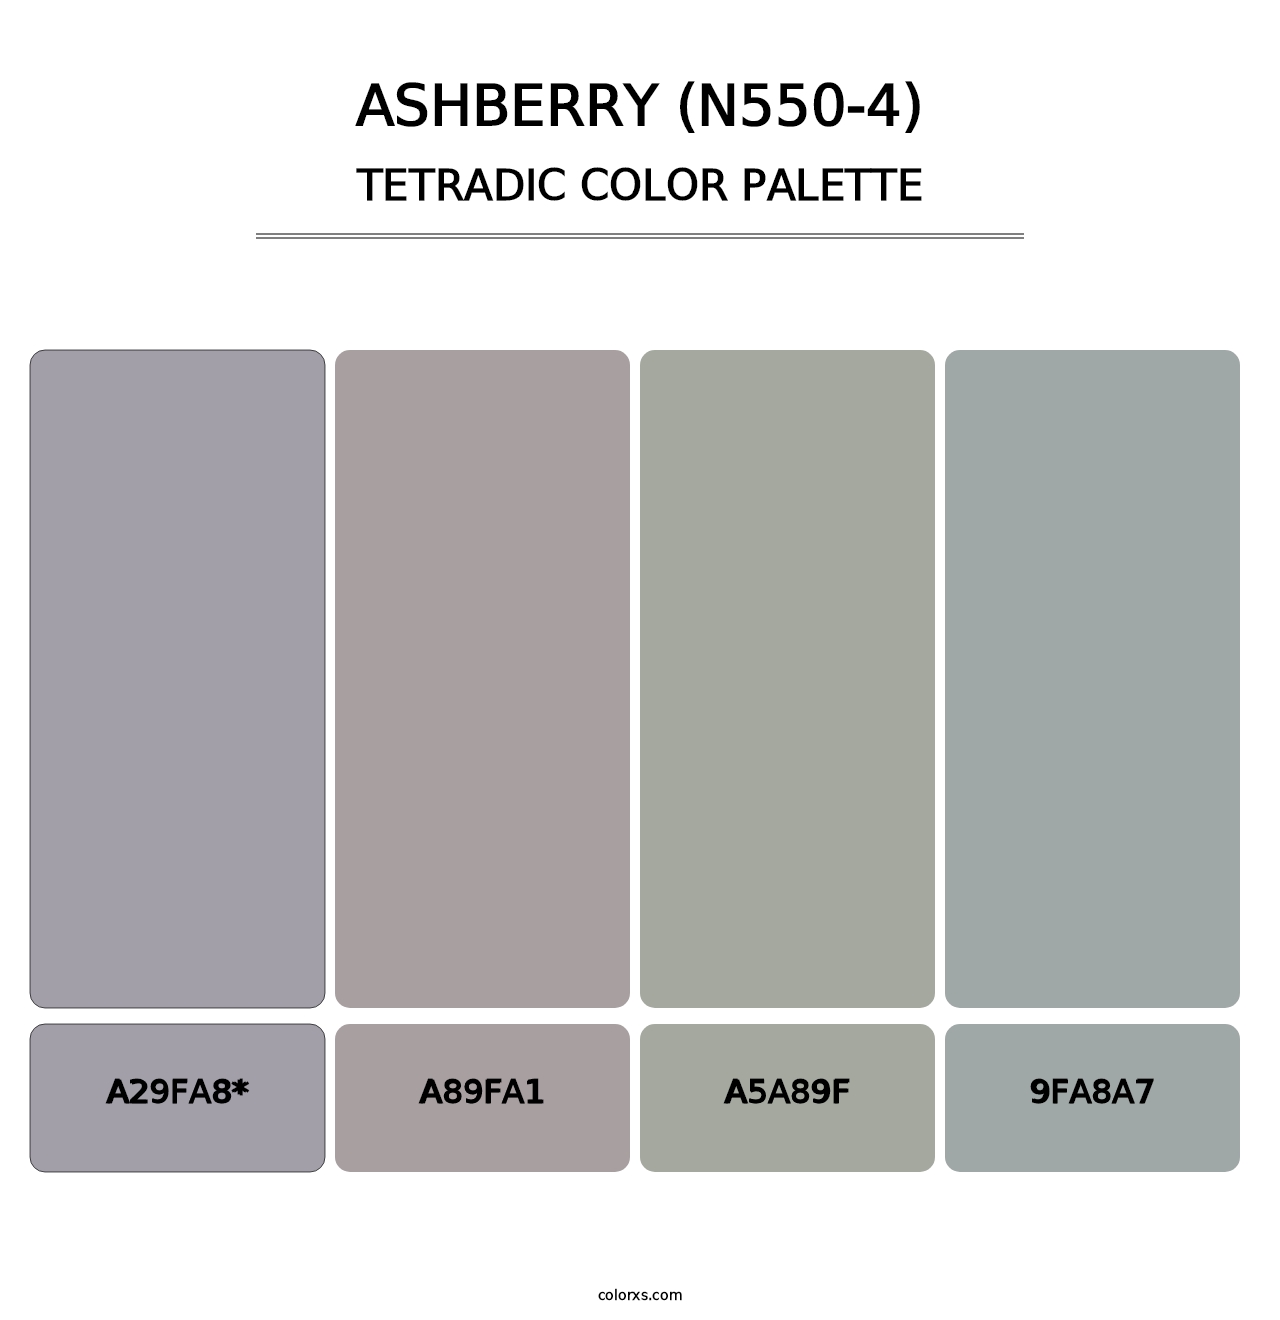 Ashberry (N550-4) - Tetradic Color Palette